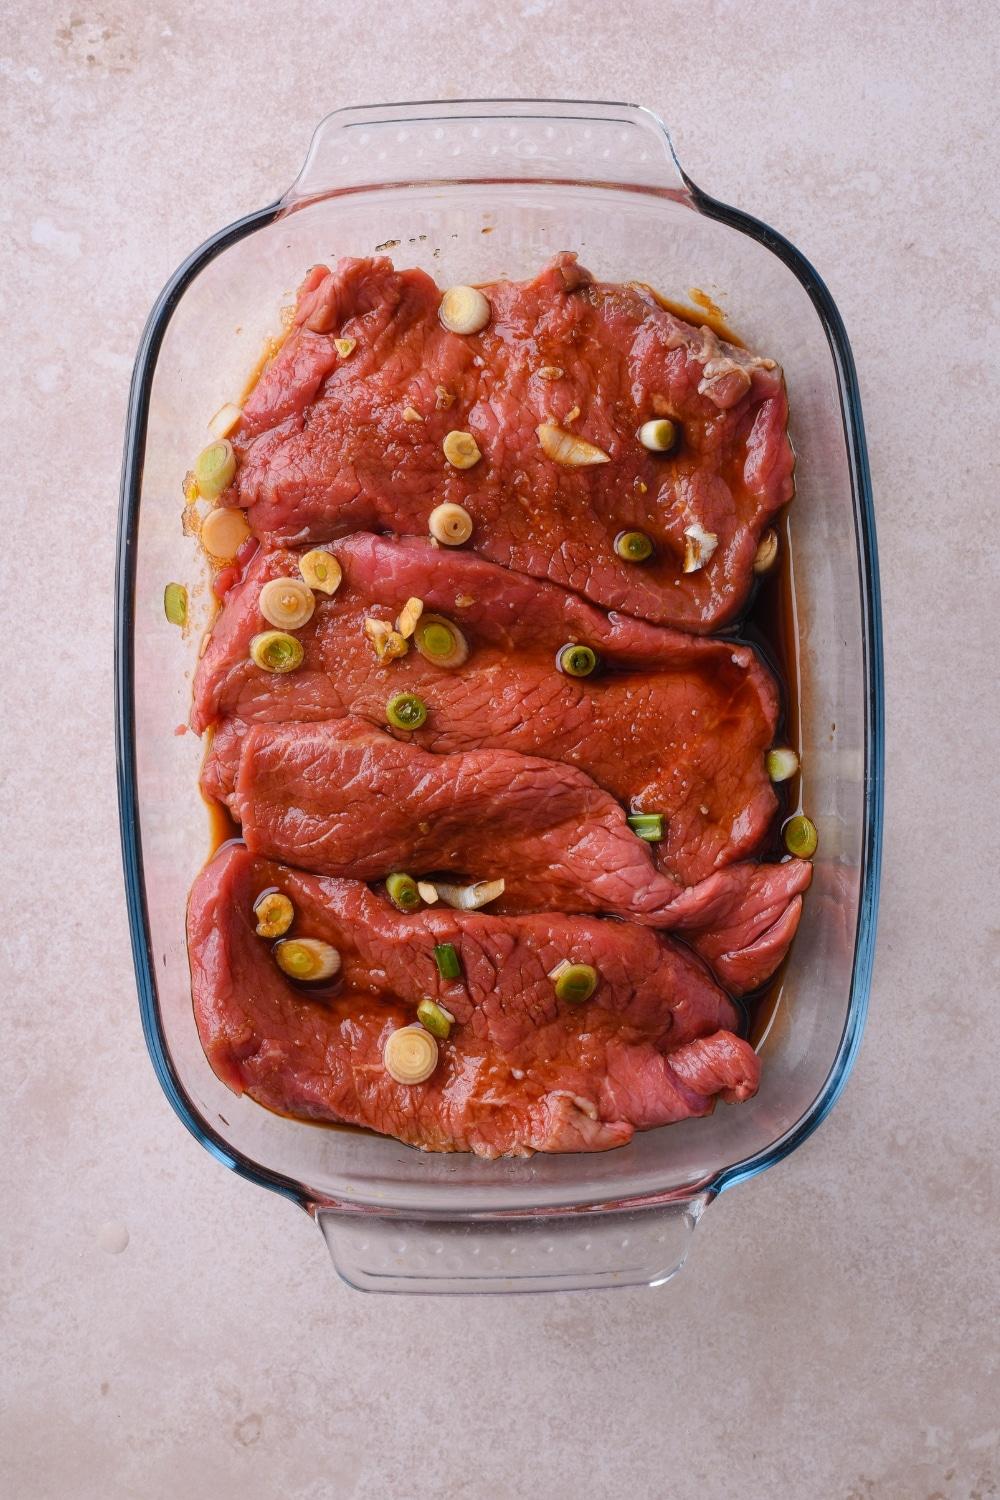 Raw sirloin tip steak covered in marinade in a glass baking dish.